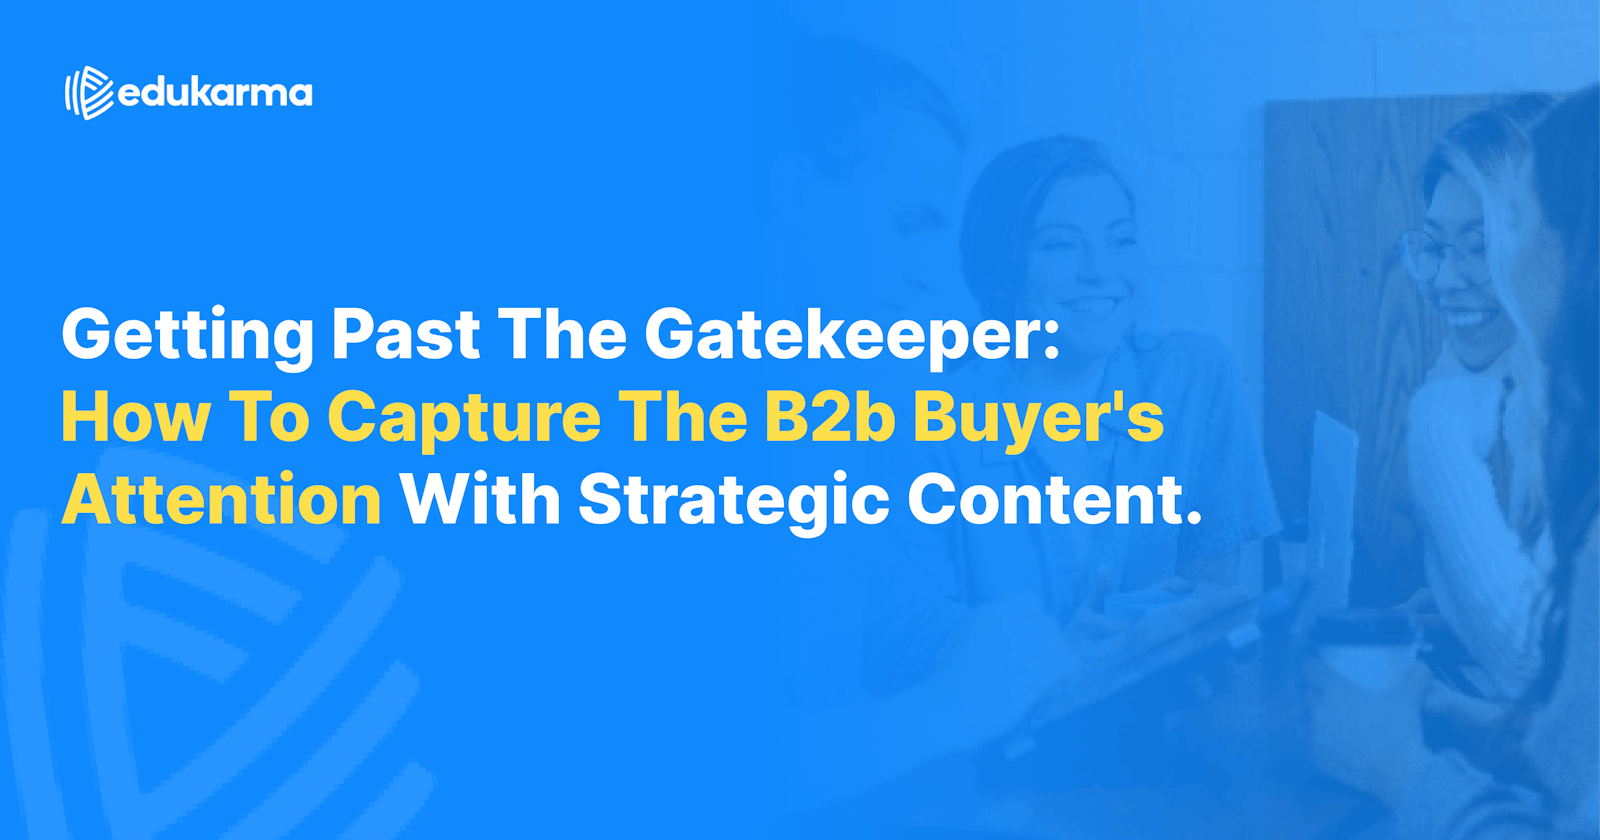 Getting Past the Gatekeeper: How to Capture the B2B Buyer's Attention with Strategic Content